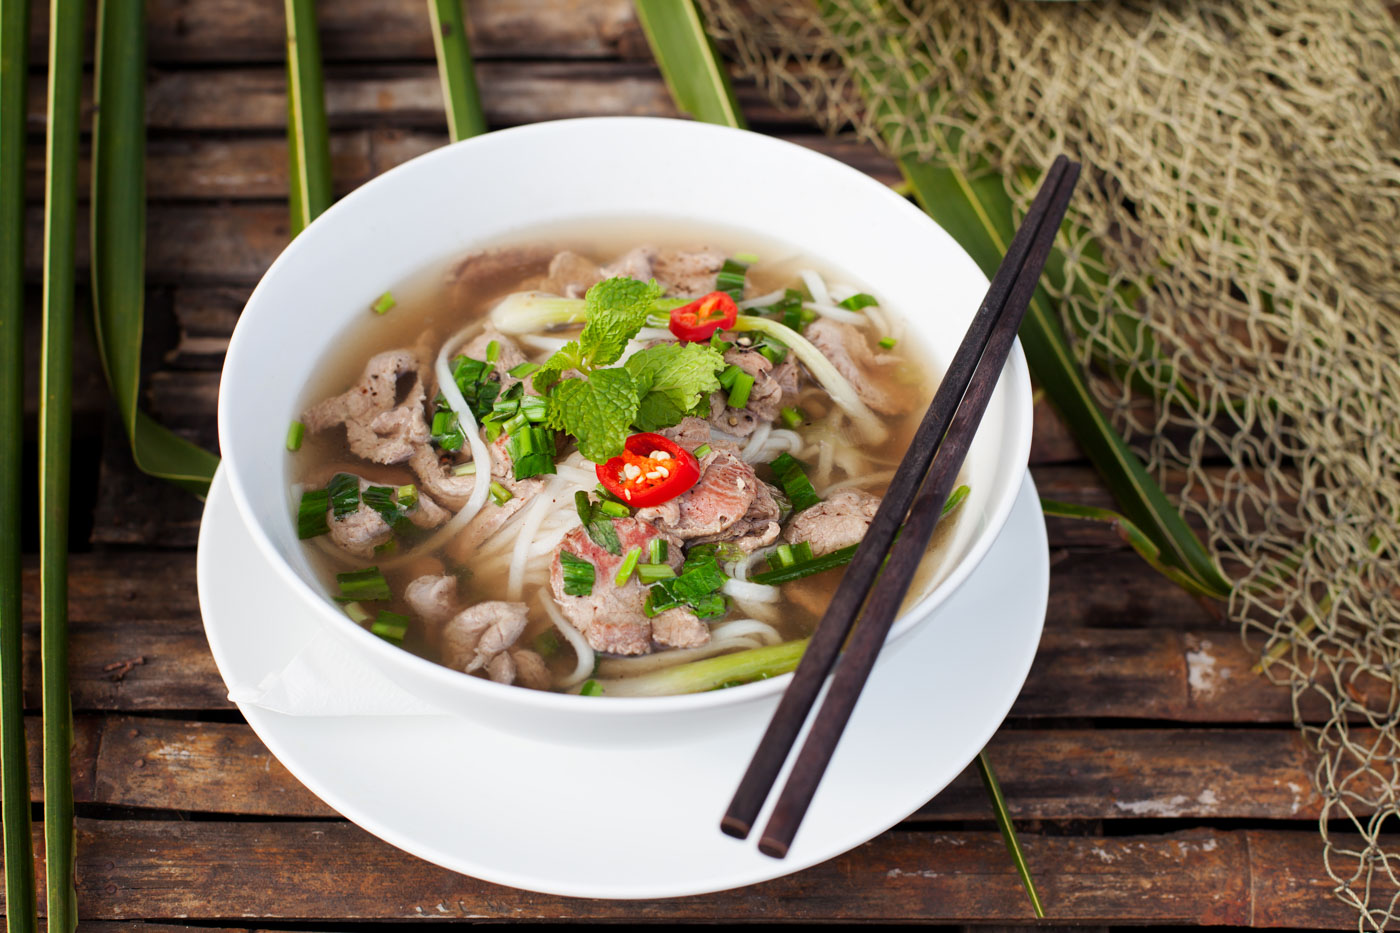 SOUTHEAST ASIAN FOOD. Pho, or rice noodle soup, is one of Vietnam's most popular dishes, comprised of clear broth, meat, veggies, and rice noodles. Photo from Shutterstock 